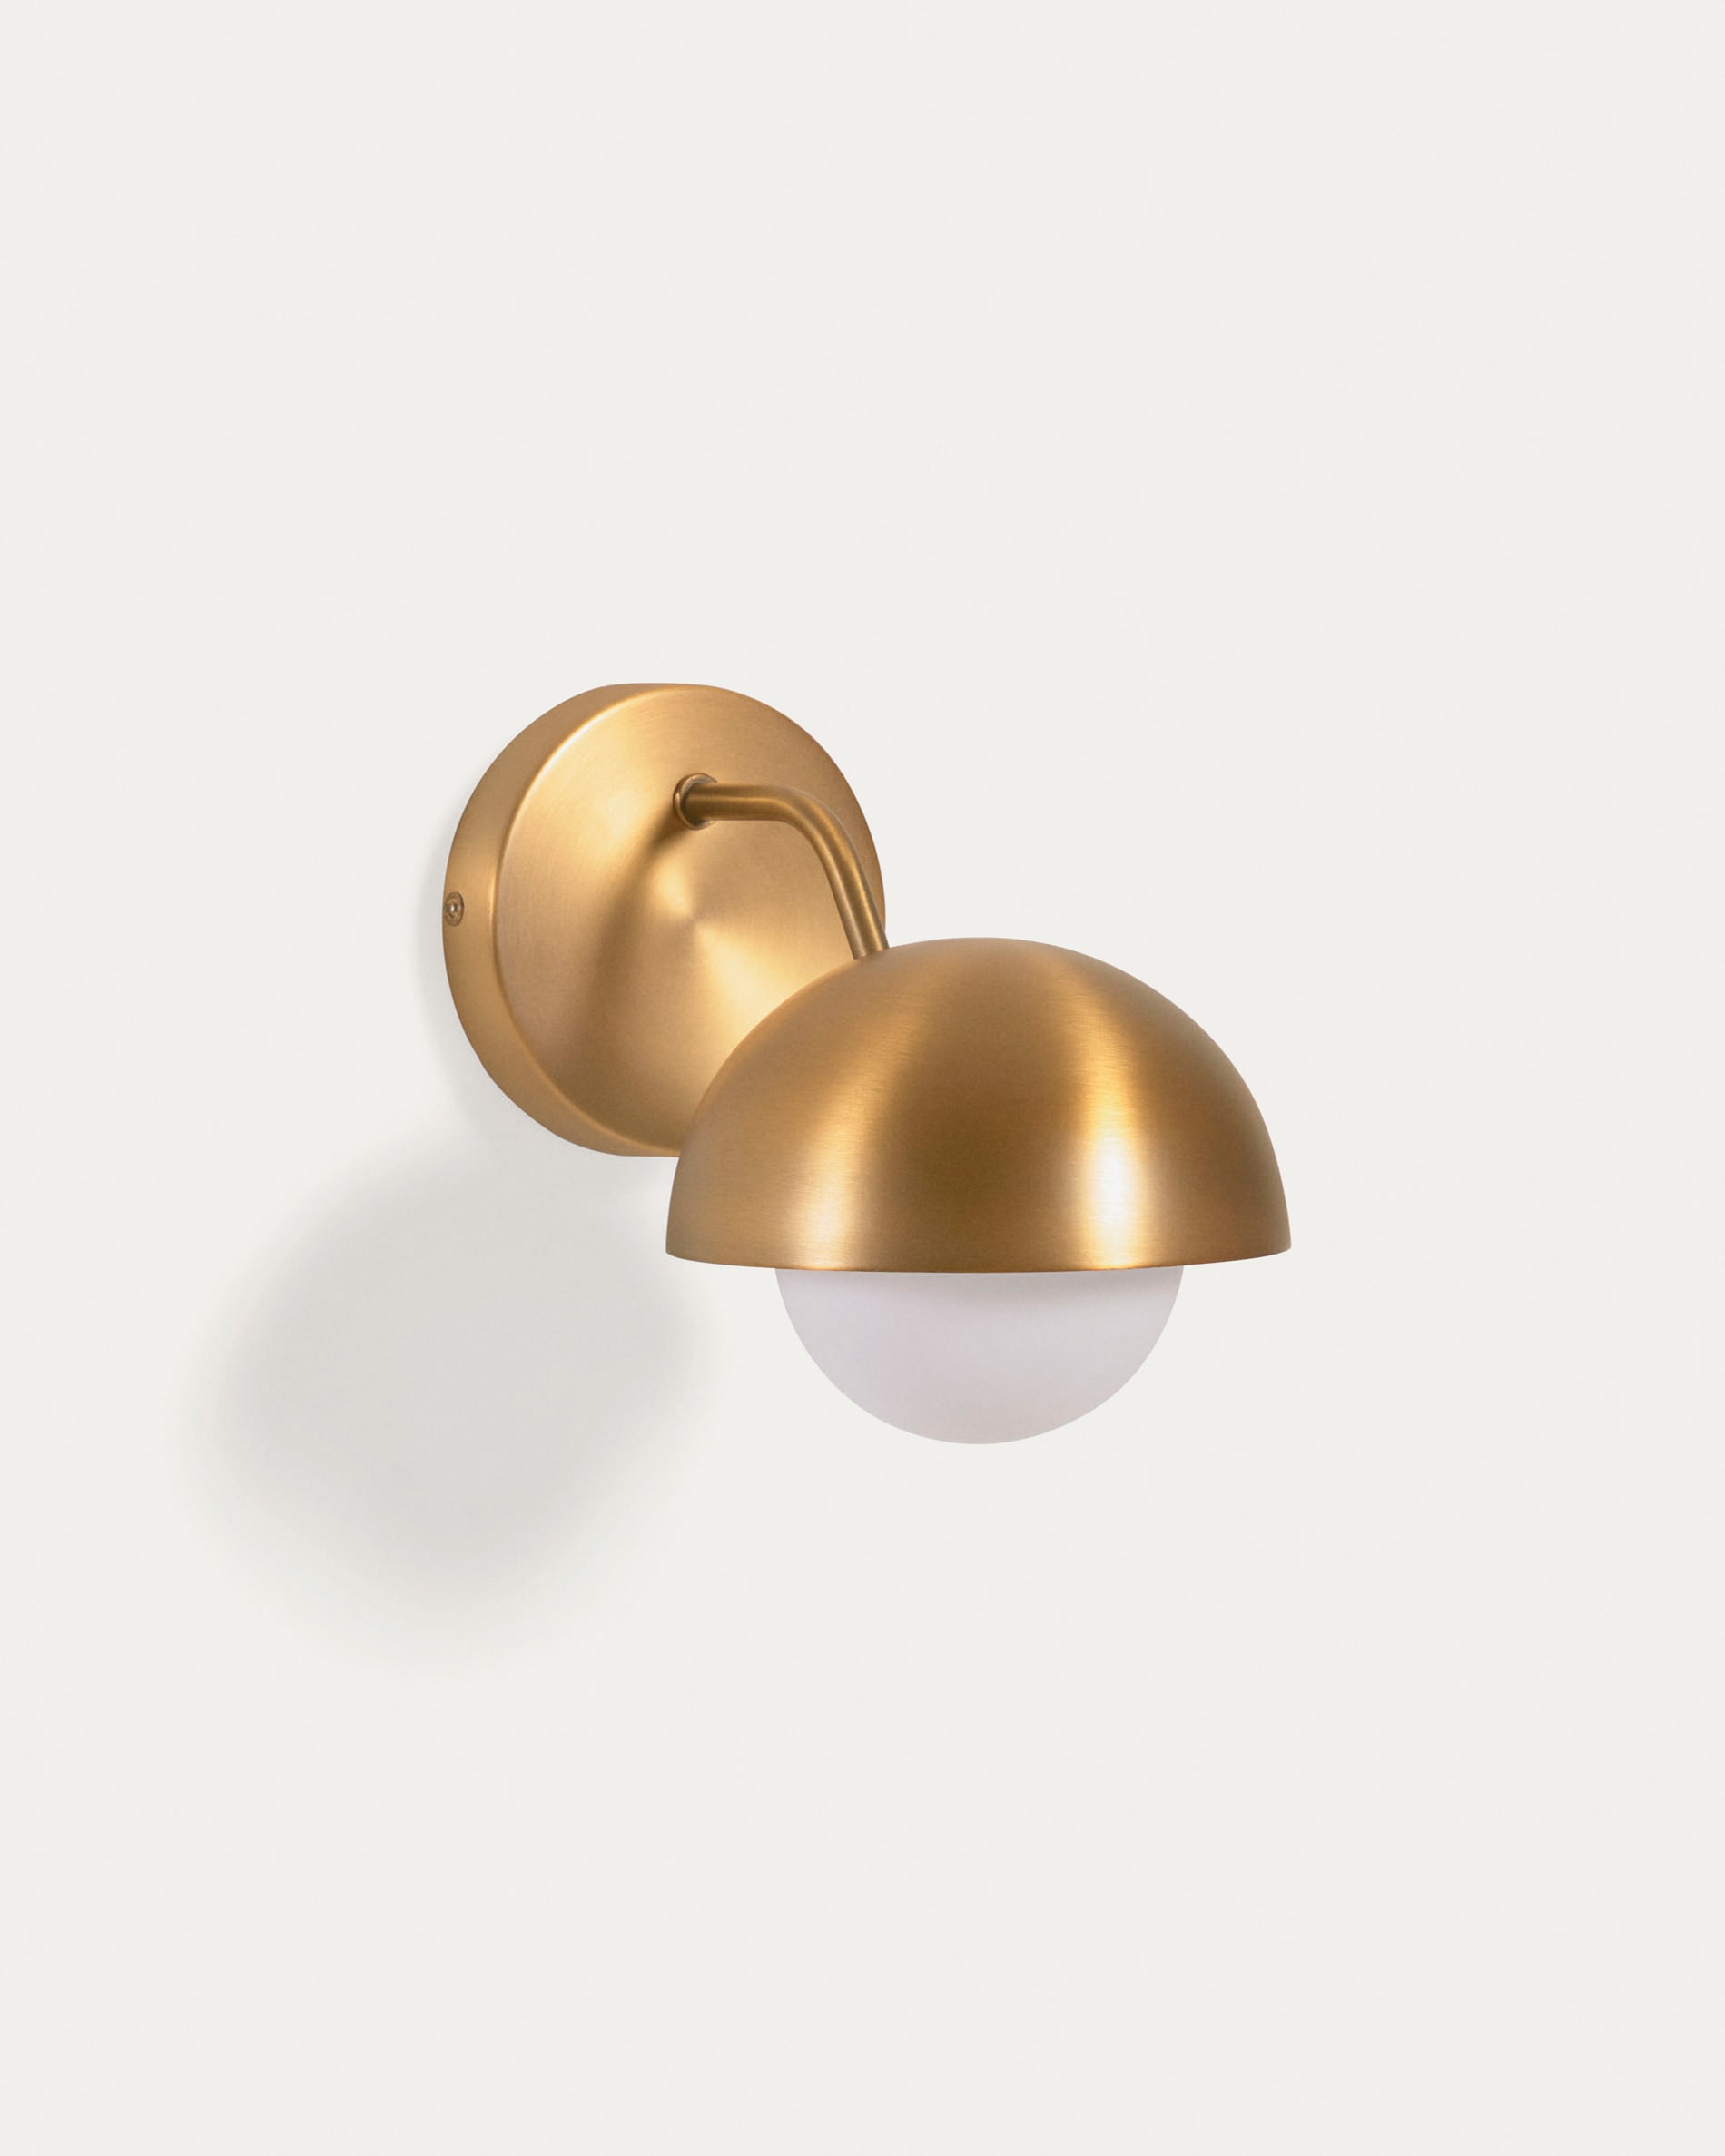 Lonela wall lamp in metal with brass finish | Kave Home